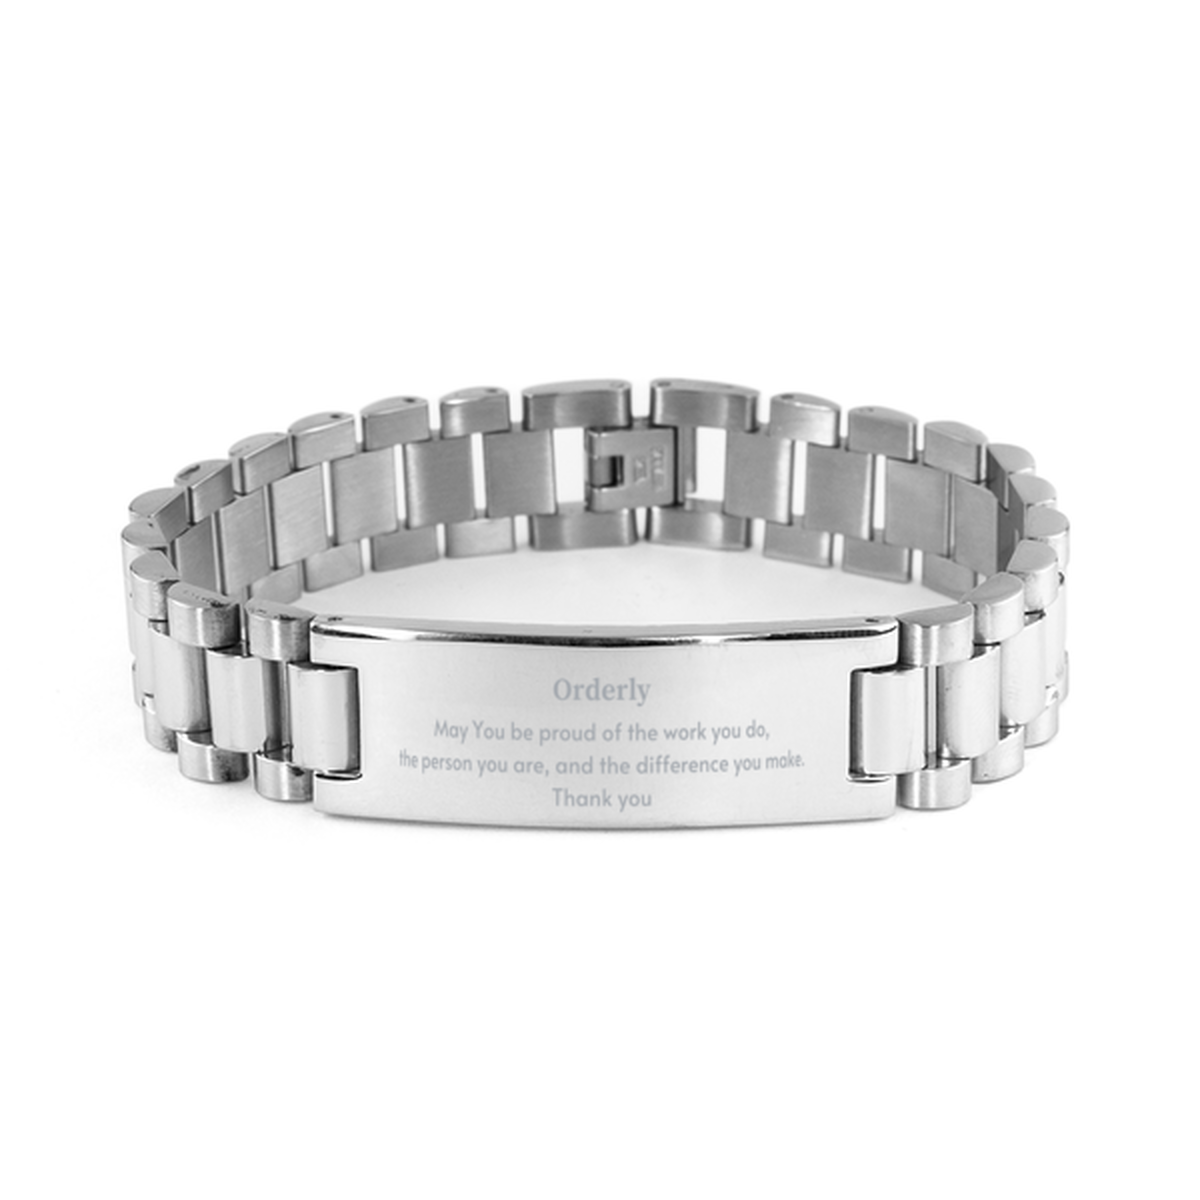 Heartwarming Ladder Stainless Steel Bracelet Retirement Coworkers Gifts for Orderly, Orderly May You be proud of the work you do, the person you are Gifts for Boss Men Women Friends